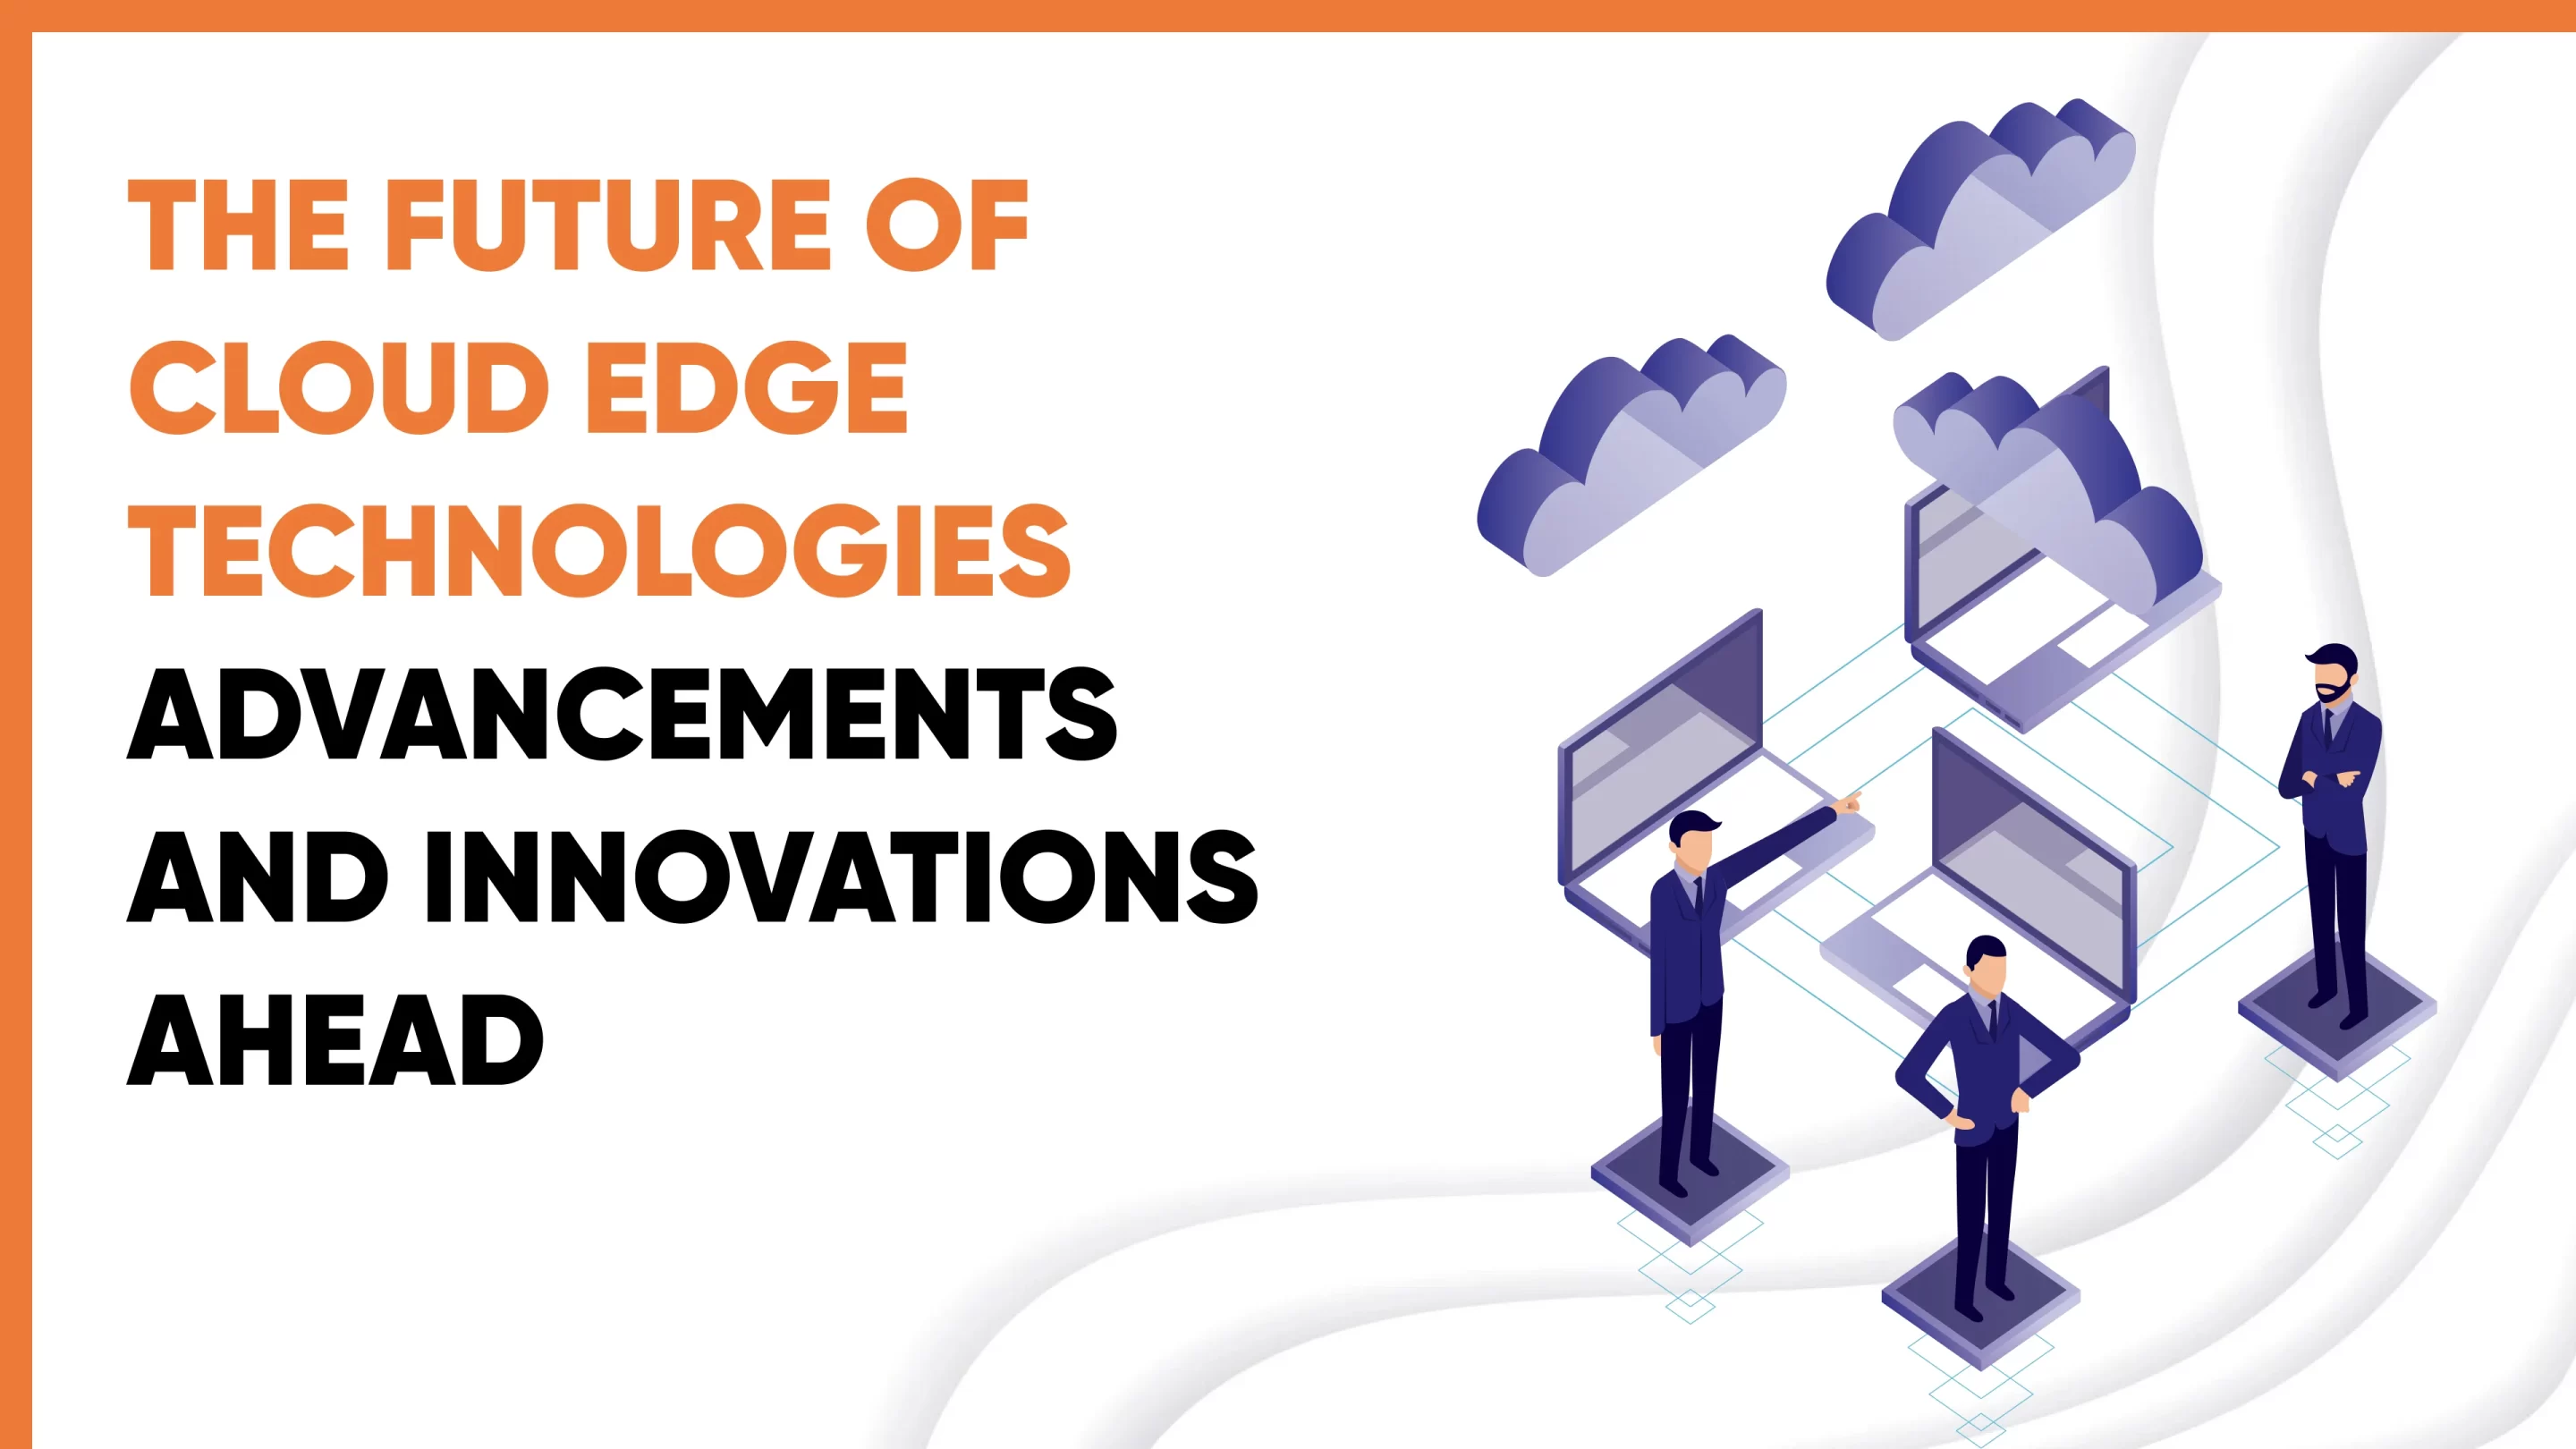 Looking Forward In The Future of Cloud Edge Technologies